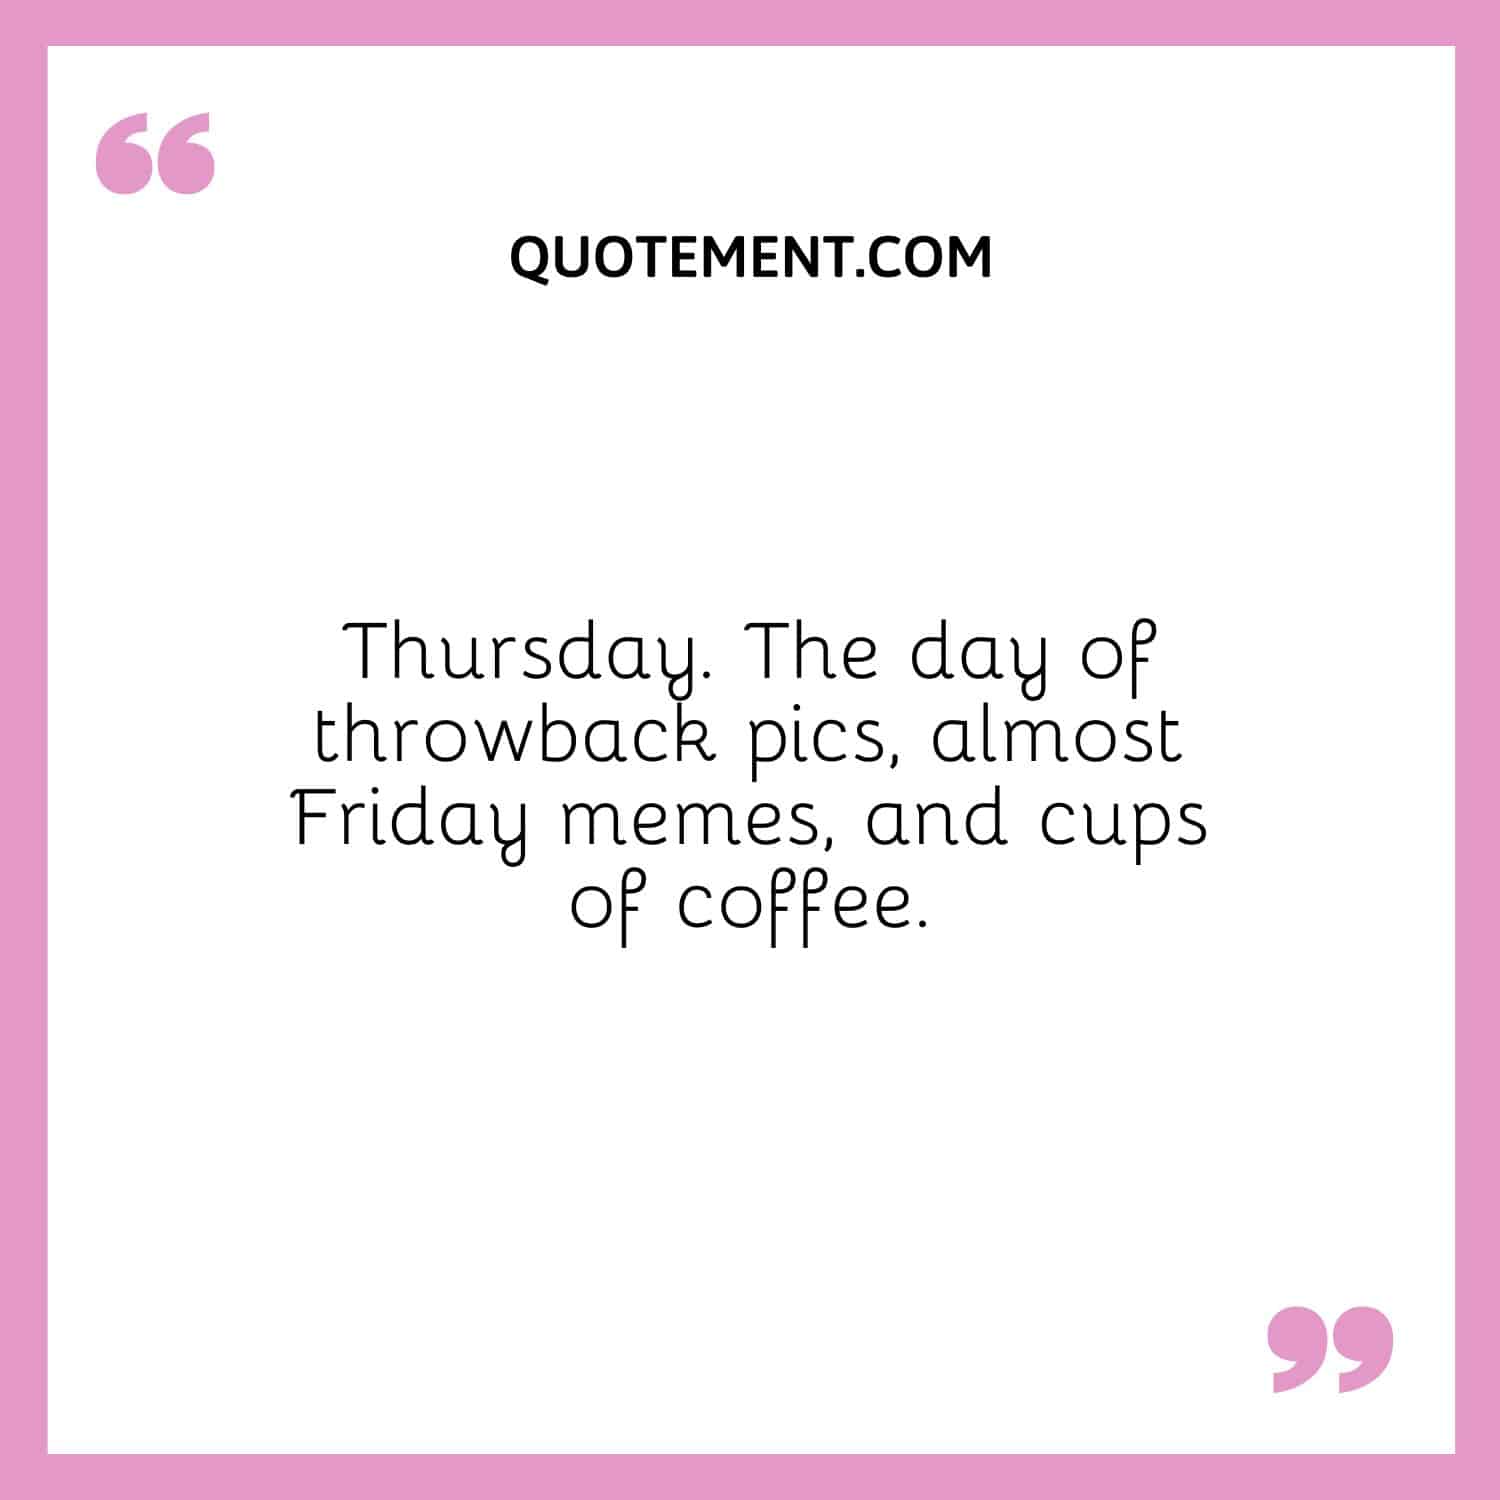 Thursday. The day of throwback pics, almost Friday memes, and cups of coffee